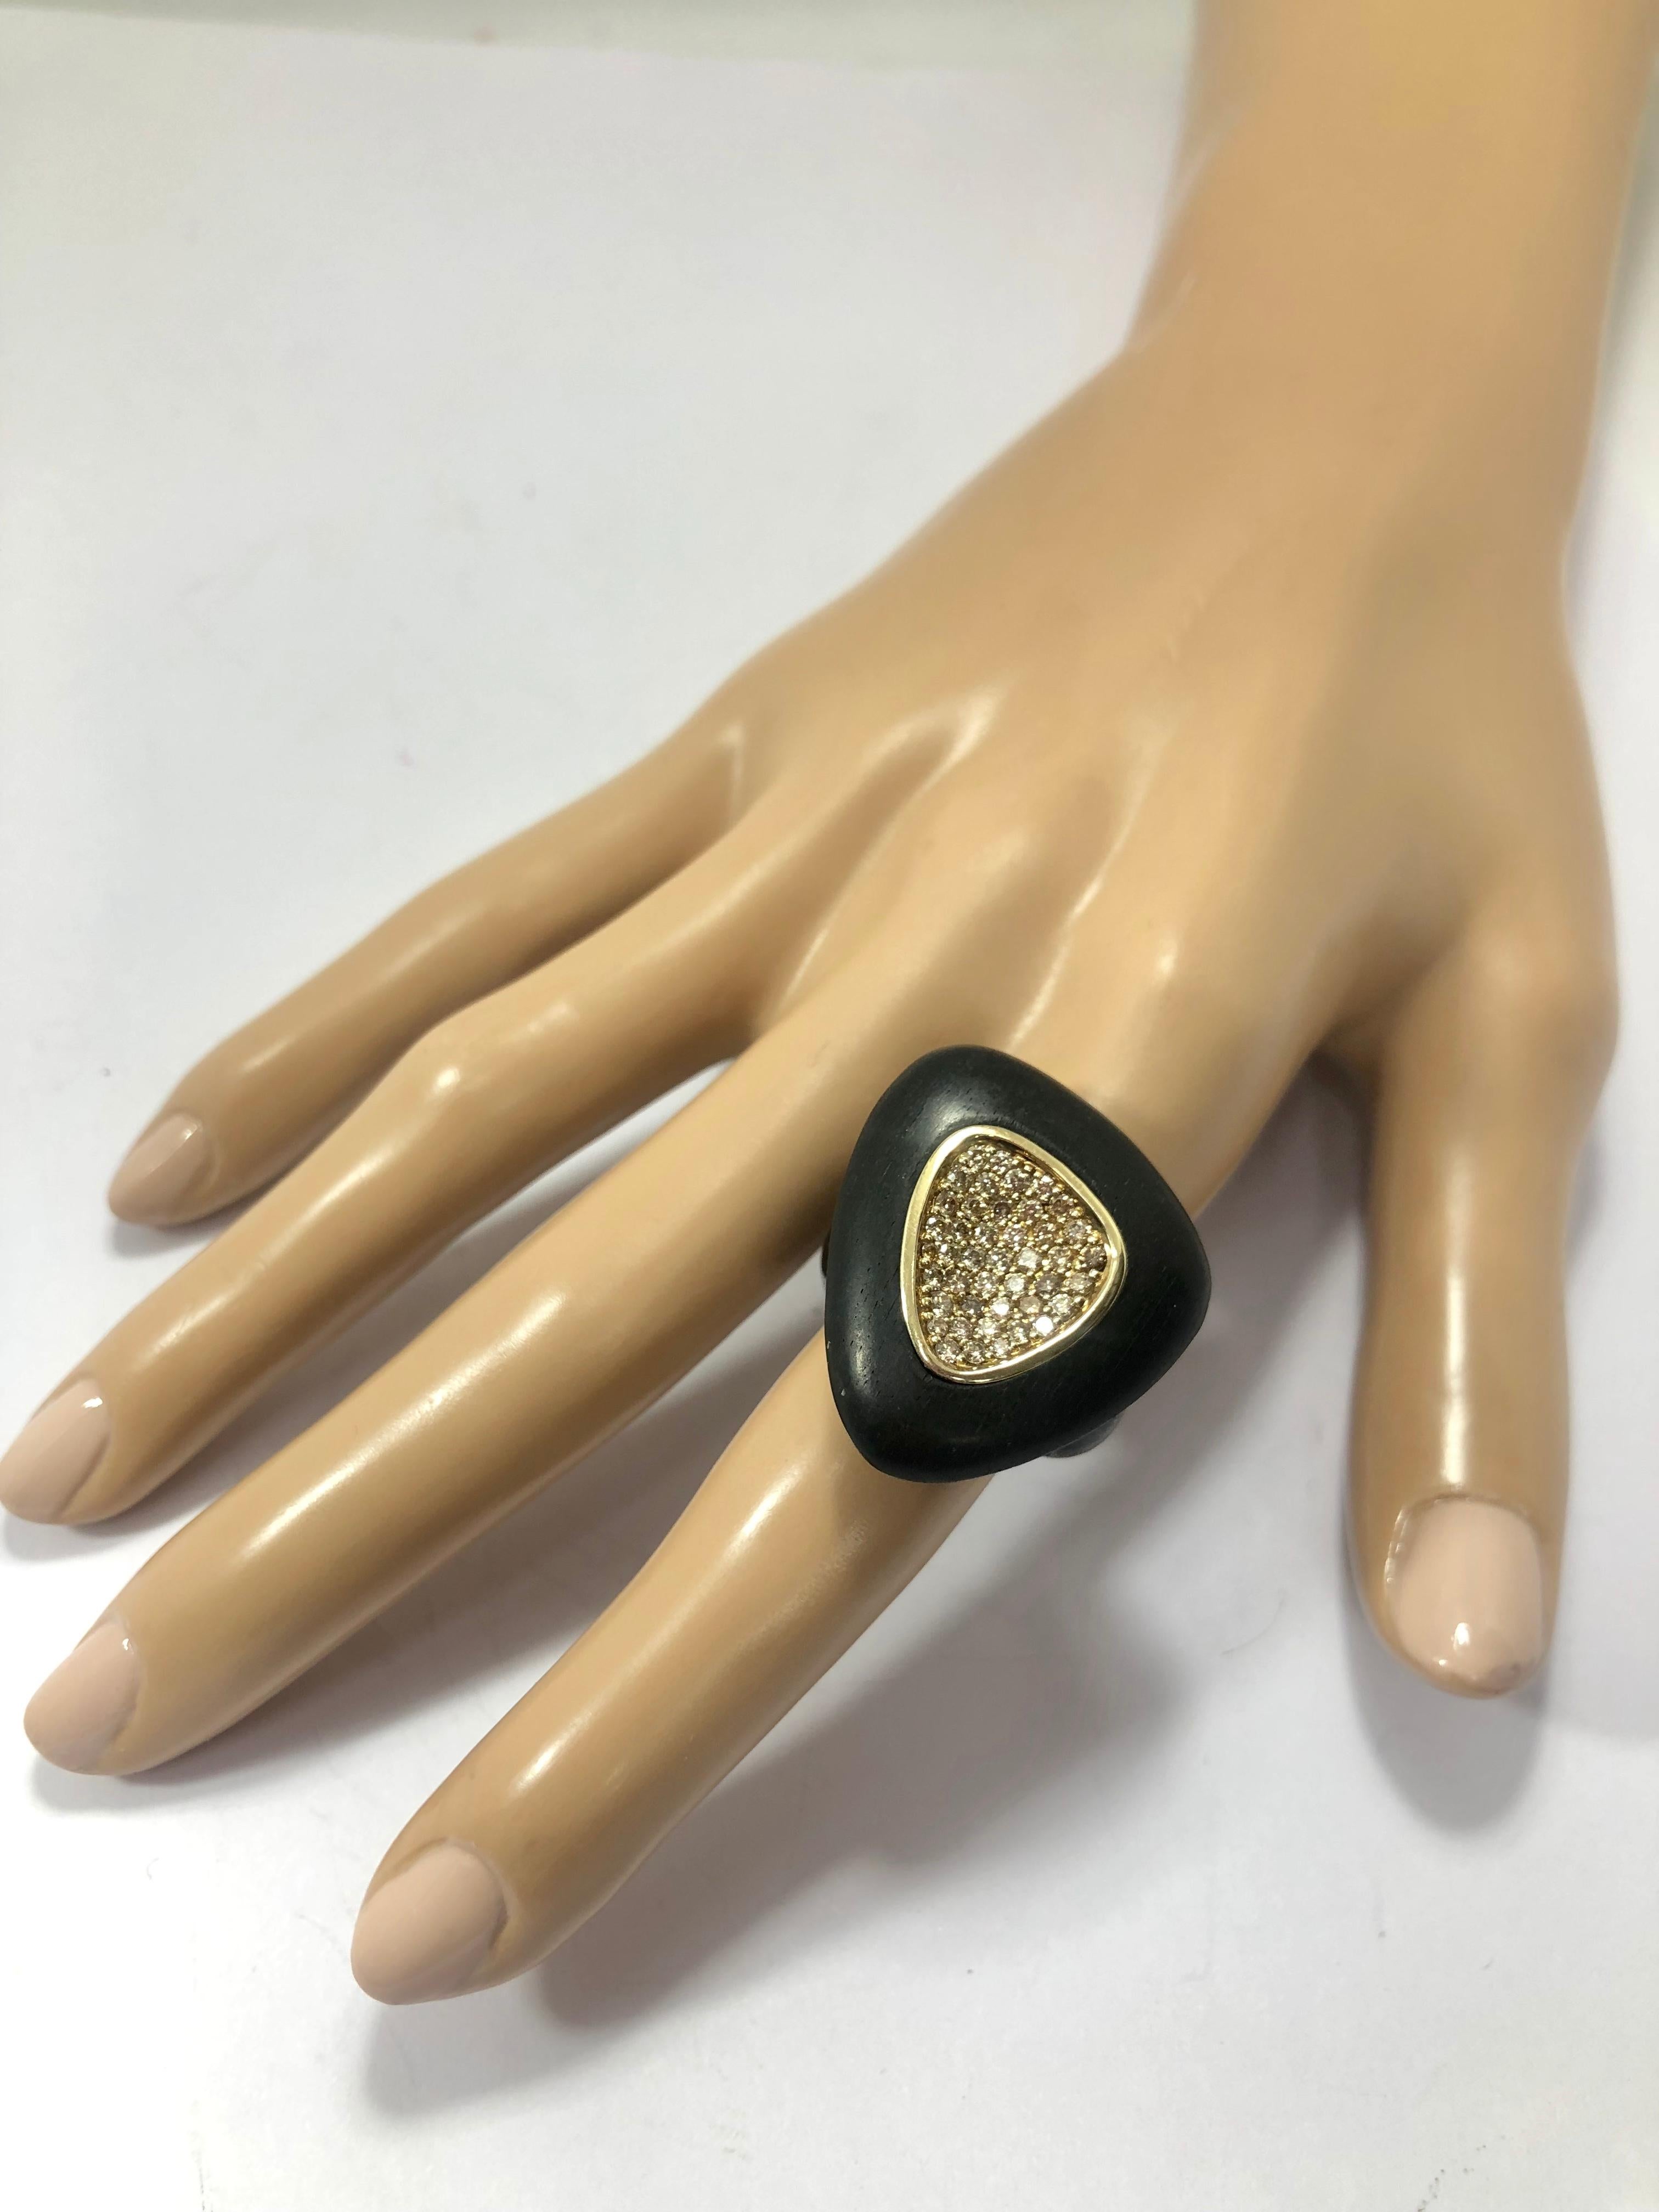 Roberto Coin Capri Plus Ebony Wood & Diamond Women's Ring in silver 
Pavé of Damonds total 0.90ct . RING SIZE EUROPE 53, US 2&3/4
READY TO SHIP
*Shipment of this piece is not affected by COVID-19. Orders welcome!*
In 1996, a jewelry collection was